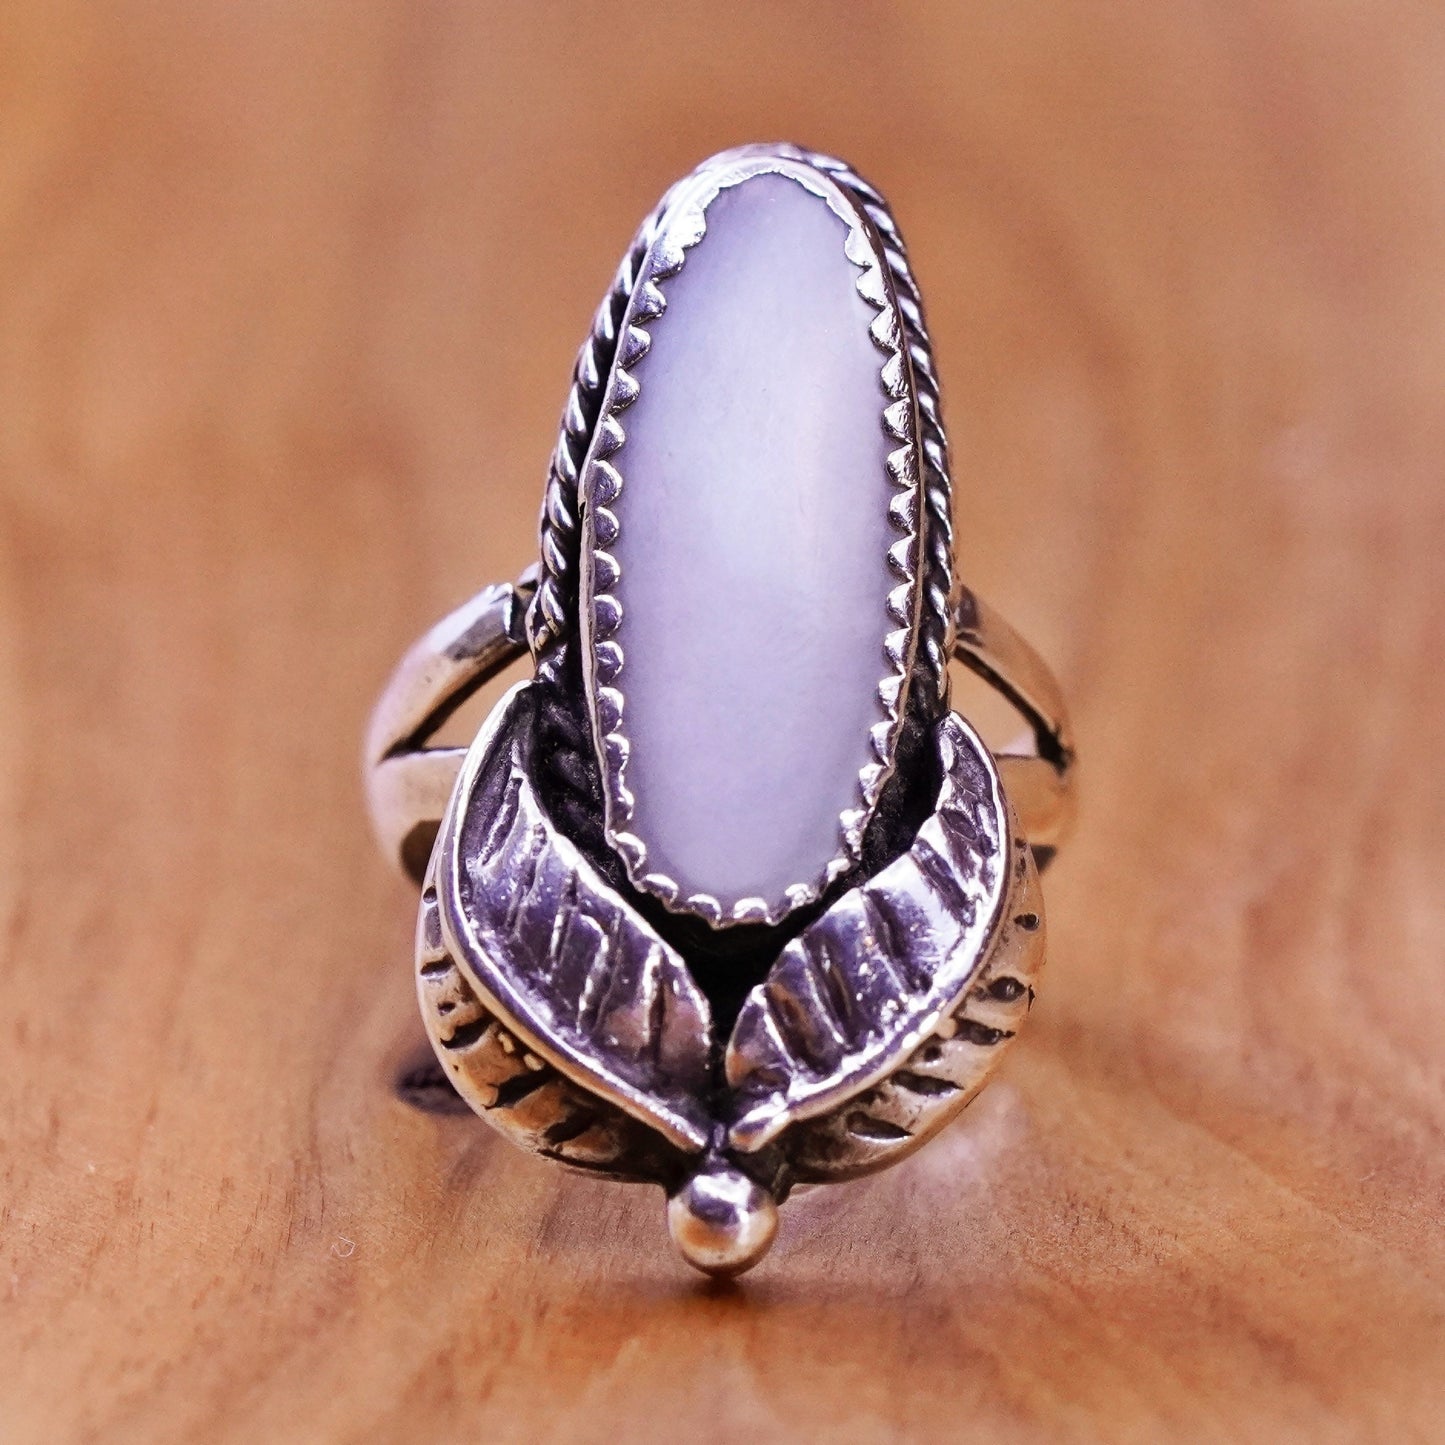 Size 6.25, Sterling 925 silver ring, jewelry, southwestern mother of pearl leaf